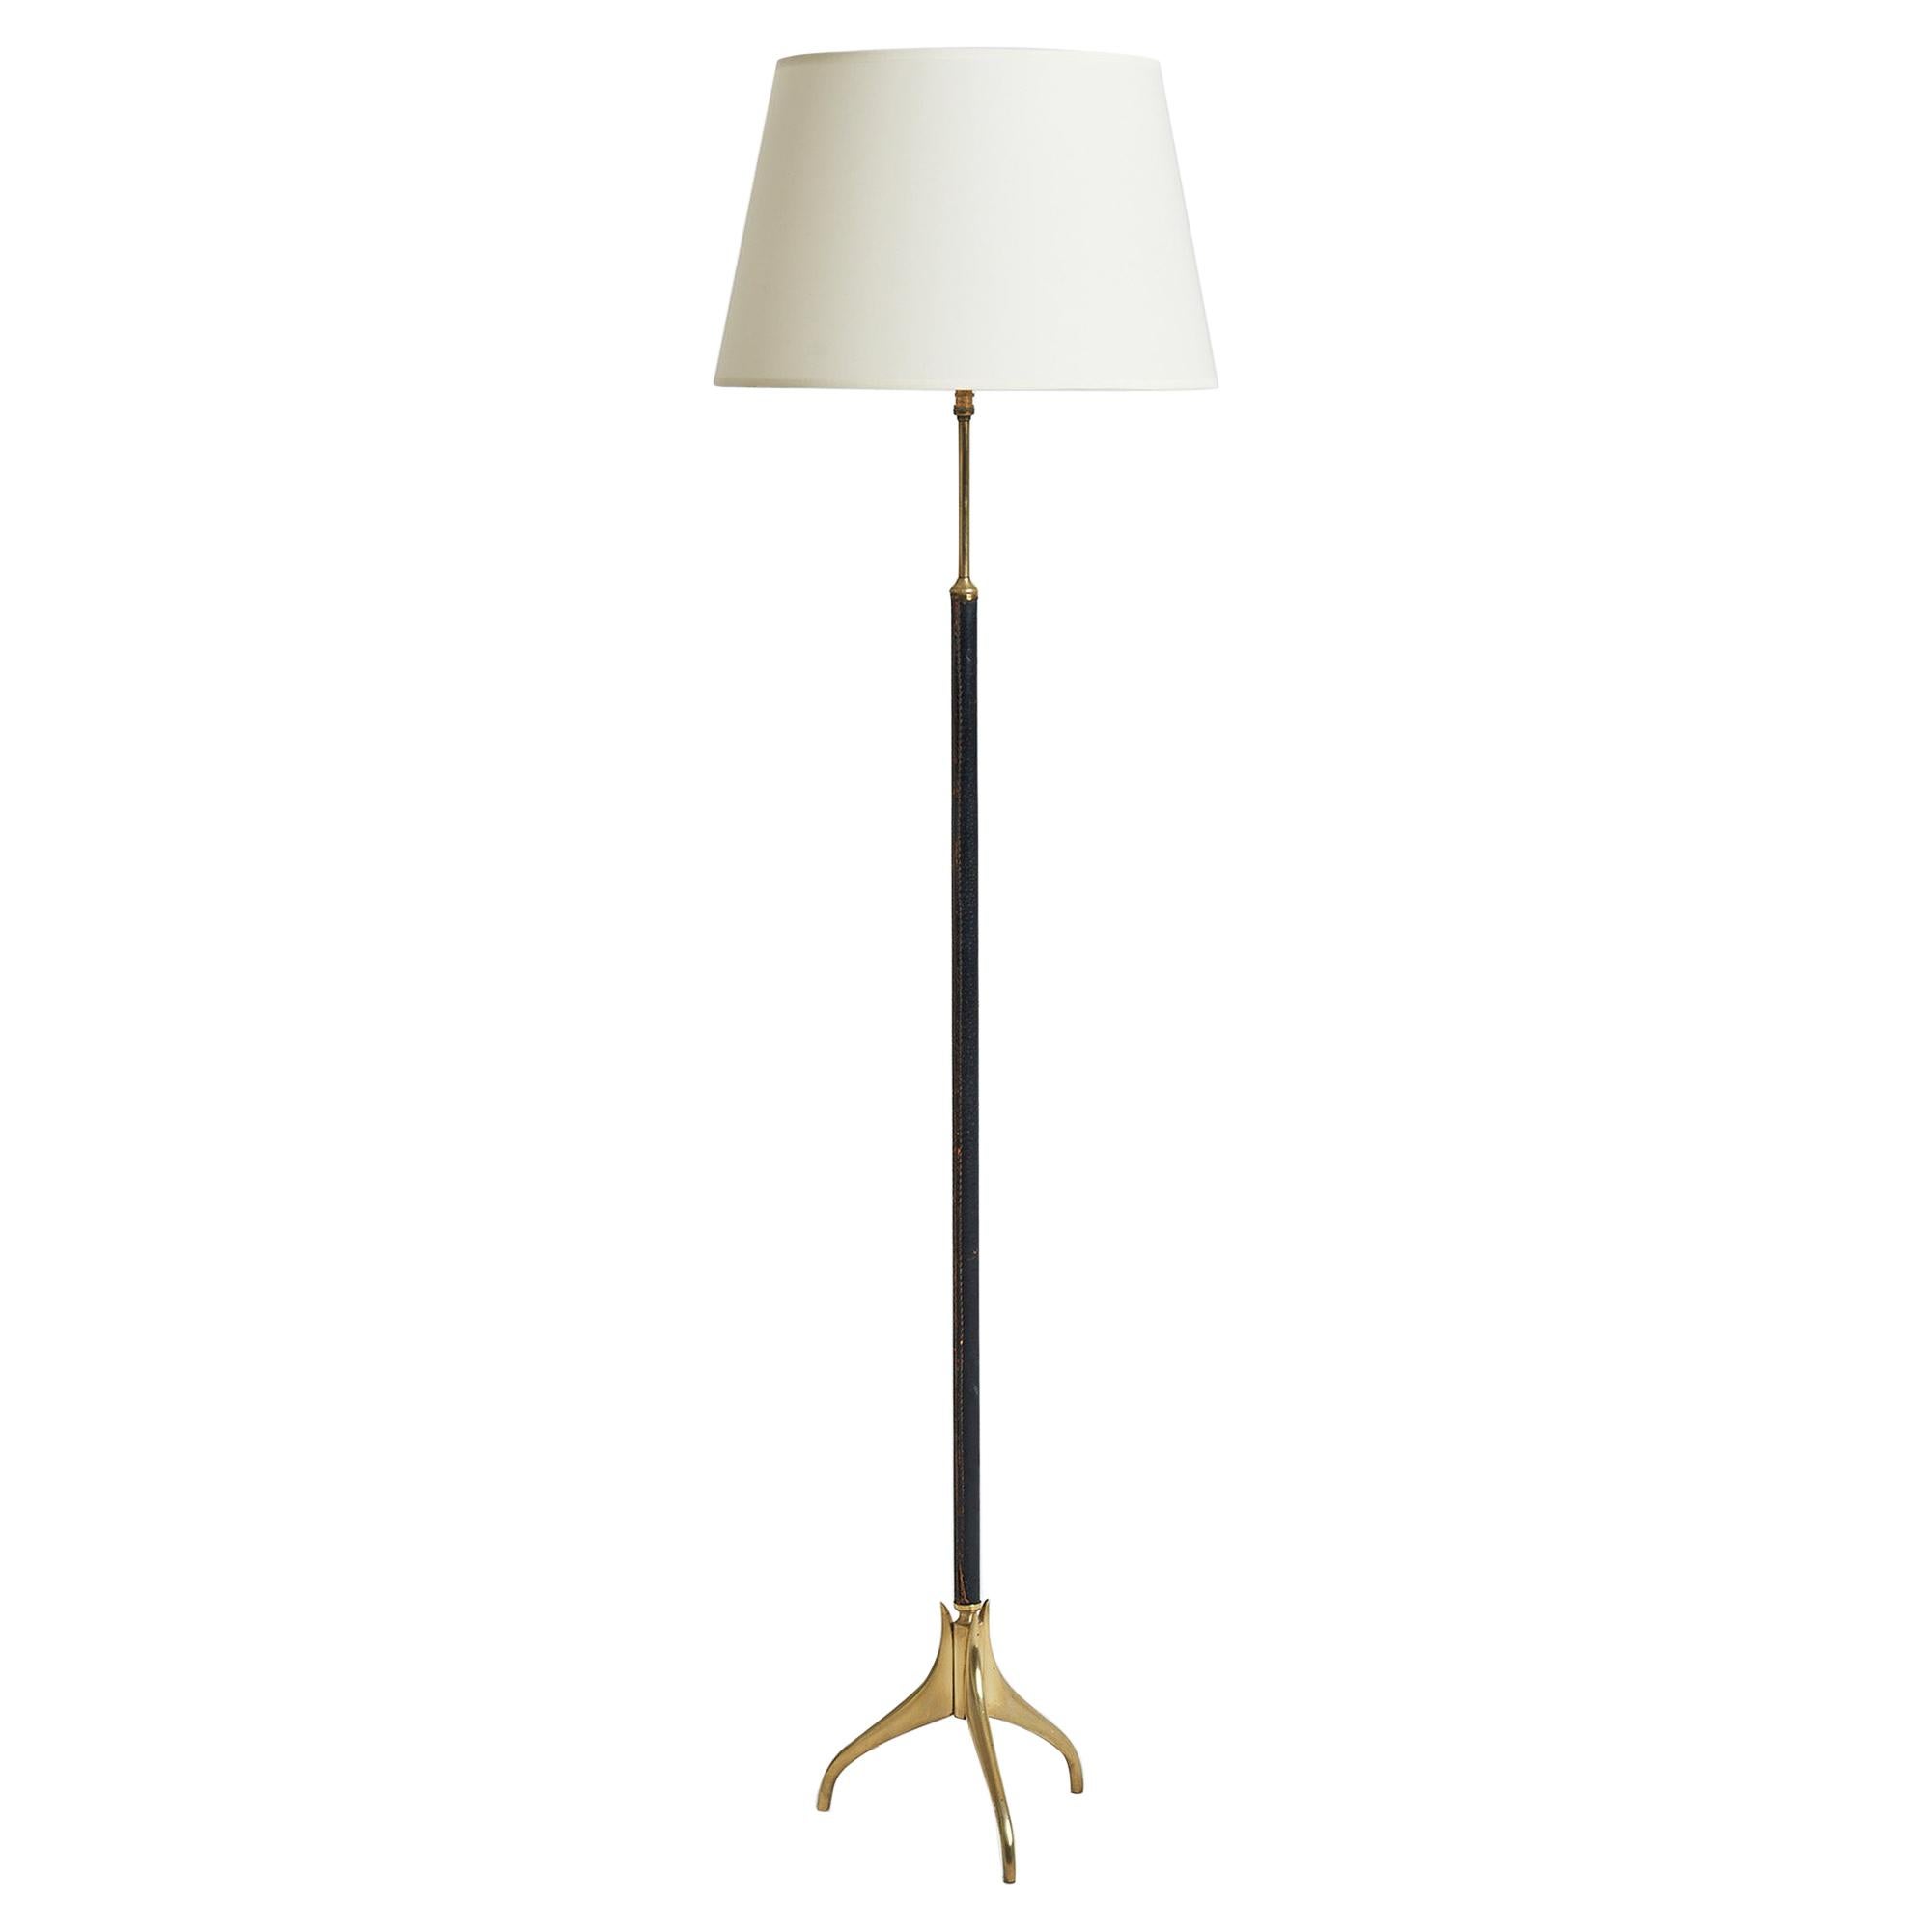 Black Leather and Brass Floor Lamp